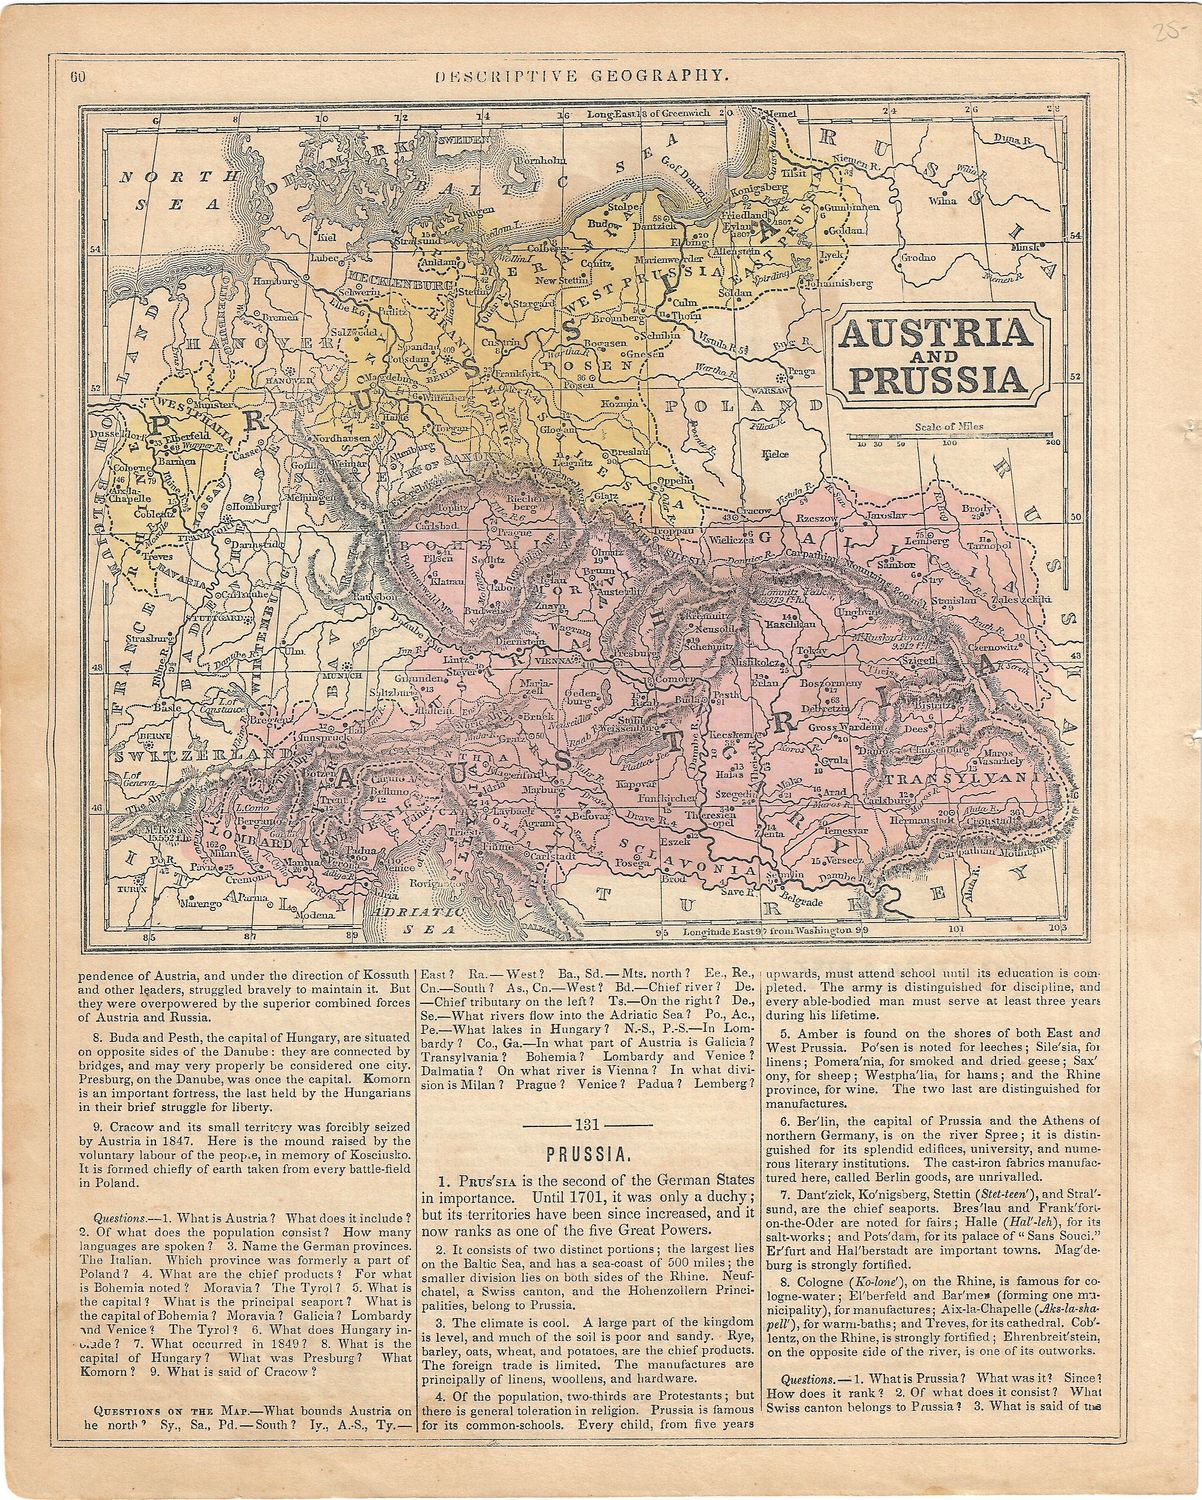 1855 Map of Austria &amp; Prussia (w/text) from a Descriptive Geography